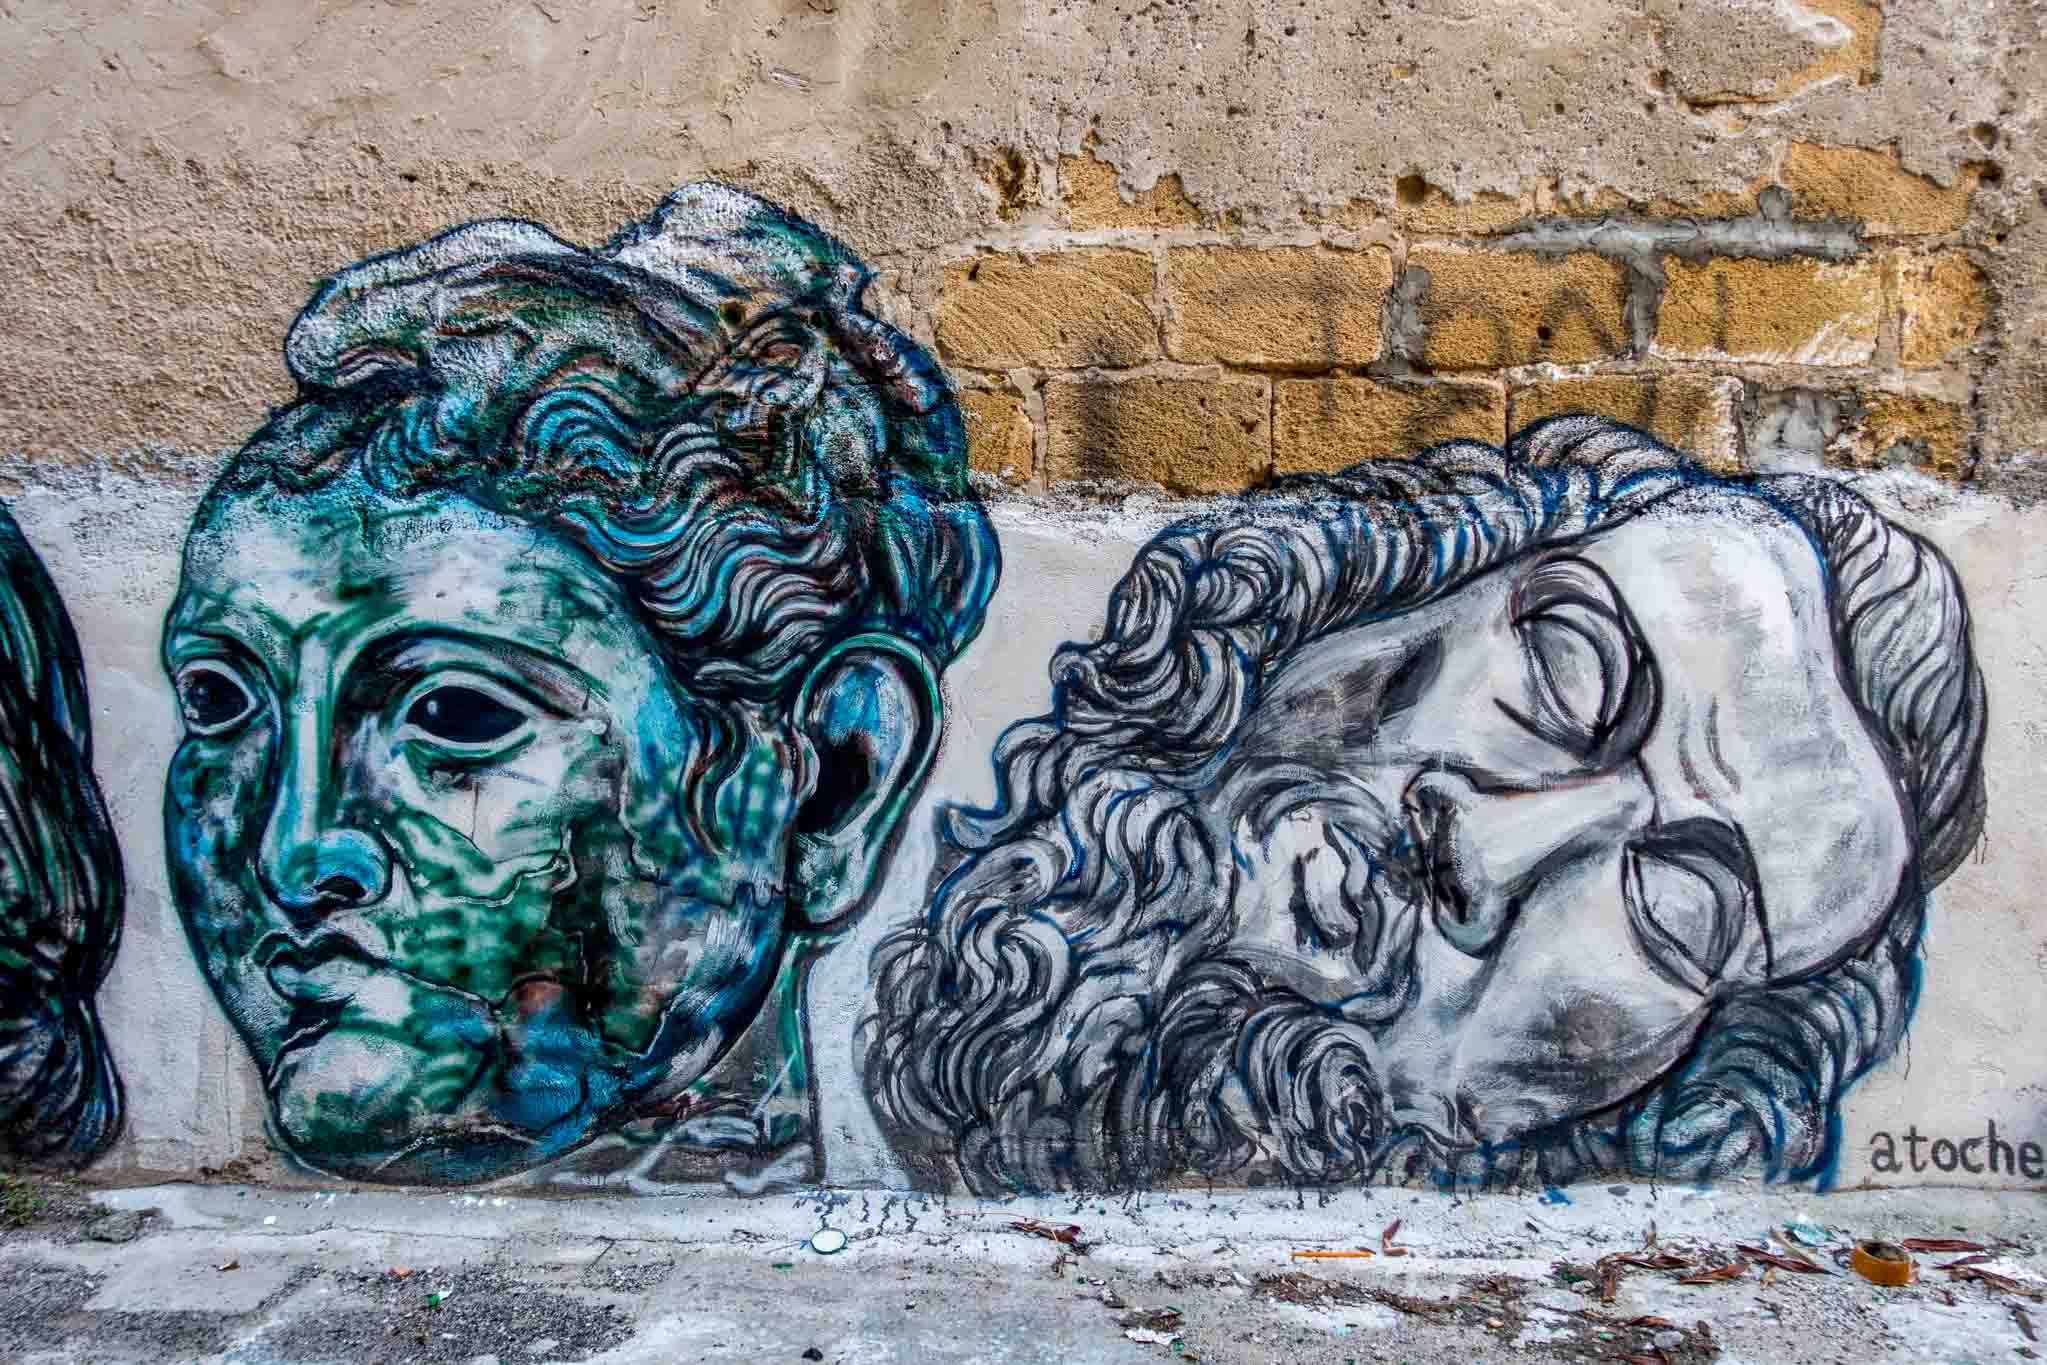 Two heads in a street art mural signed by artist Atoche